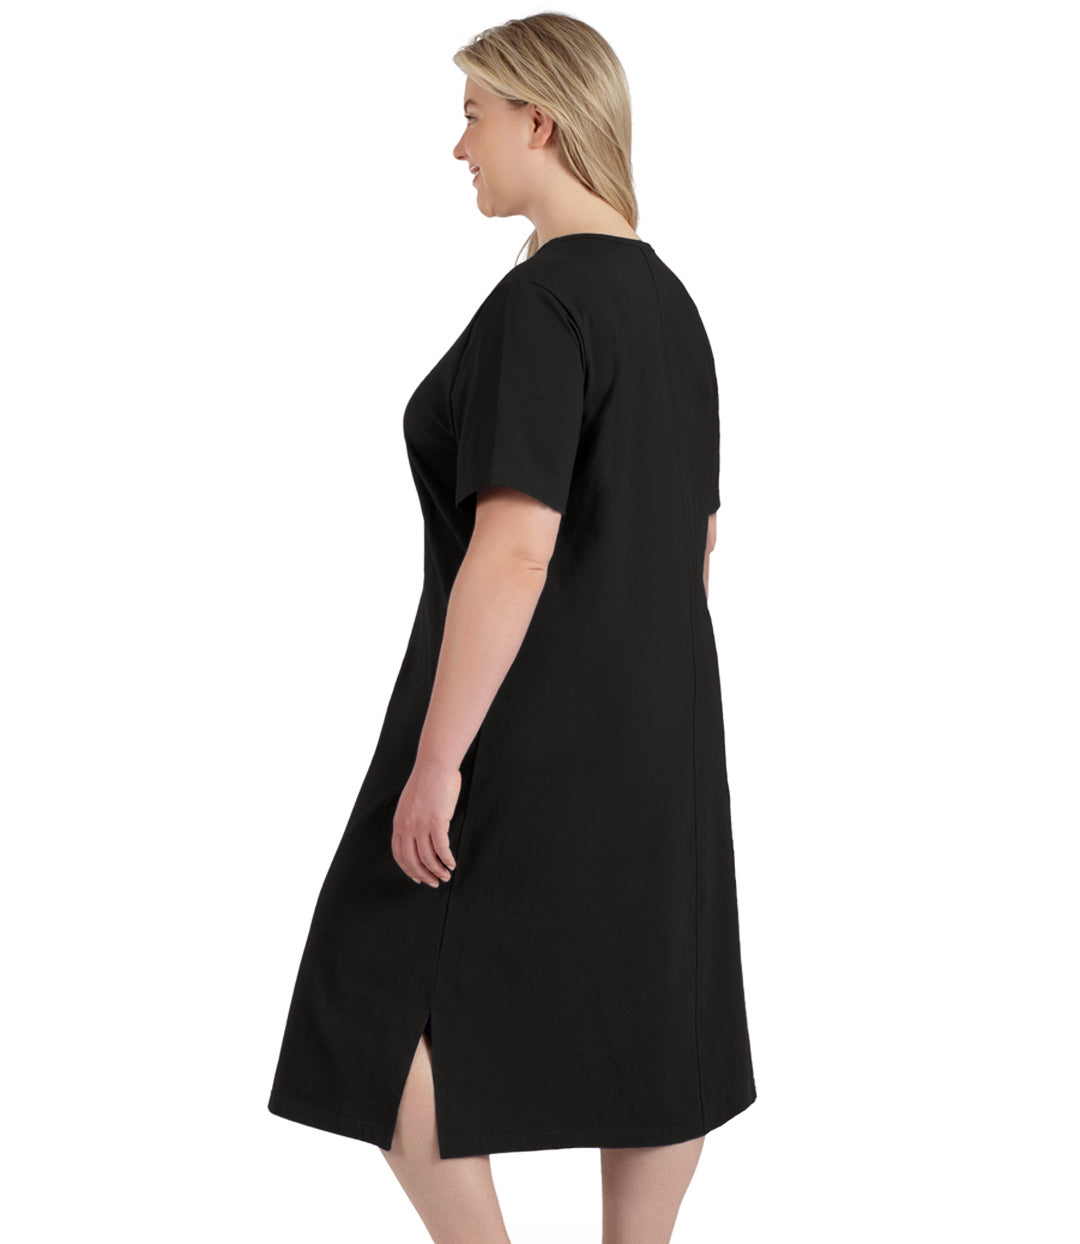 Plus size woman, facing back, wearing JunoActive’s Stretch Naturals Short Sleeve Dress in color black with her hands by her side. Slit in dress on side hem showing.